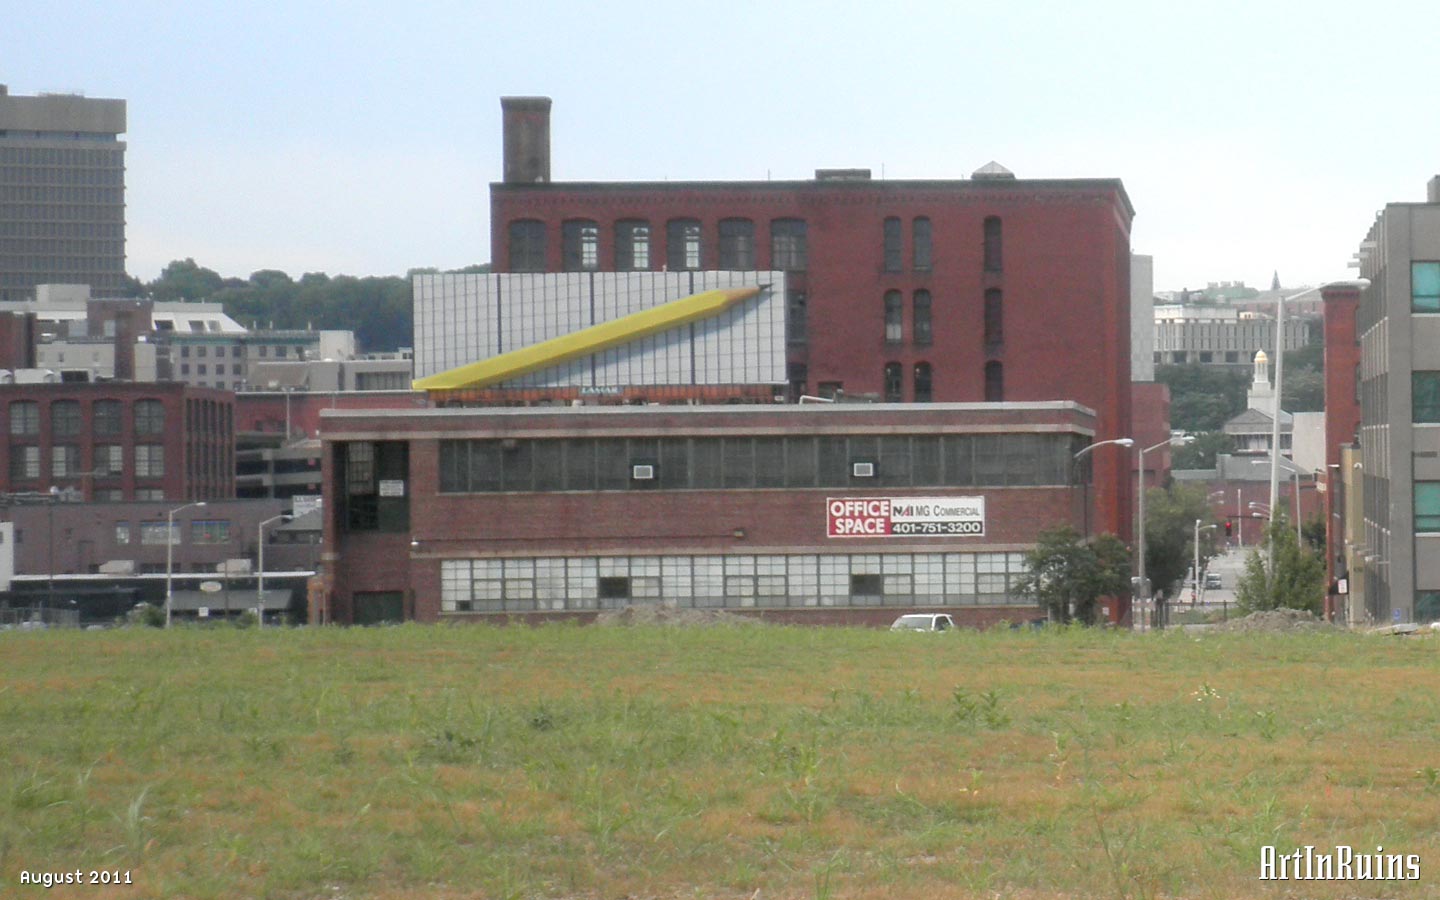 A two-story red brick industrial building on a raised basement with a cement beltcourse above each row of windows and a flat roof. The original recessed entrance is located on the southern side, two stories high and wide as a double door. A new entrance addition was added to the northwest corner. Windows are rectangular and laid edge to edge to form a continuous band around two of the building’s corners.